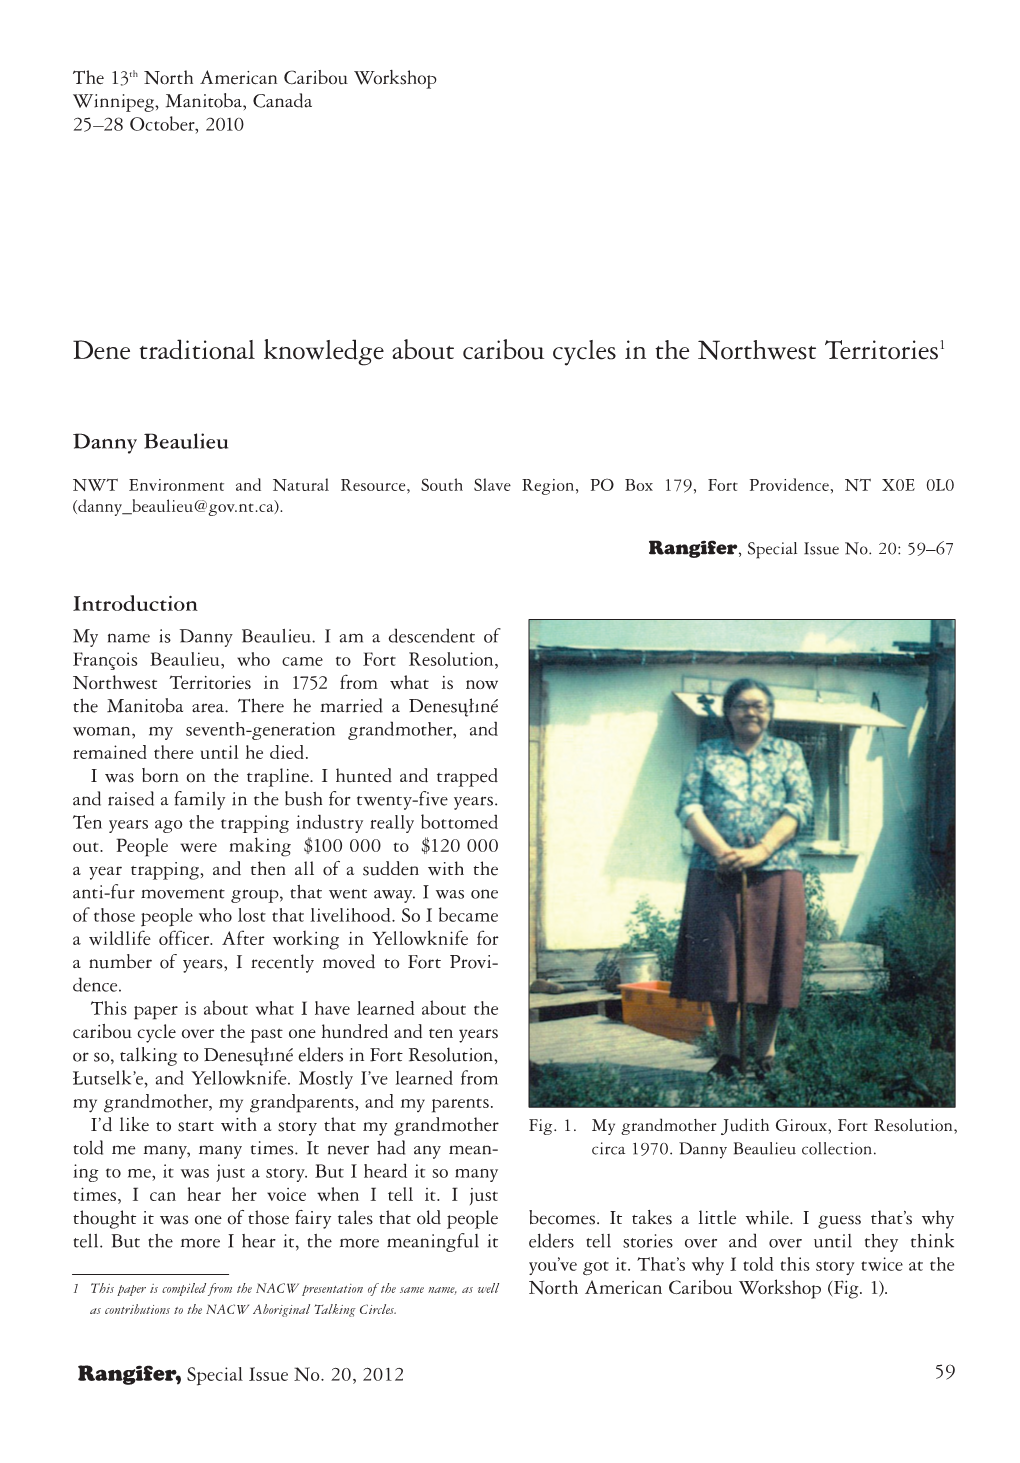 Dene Traditional Knowledge About Caribou Cycles in the Northwest Territories1